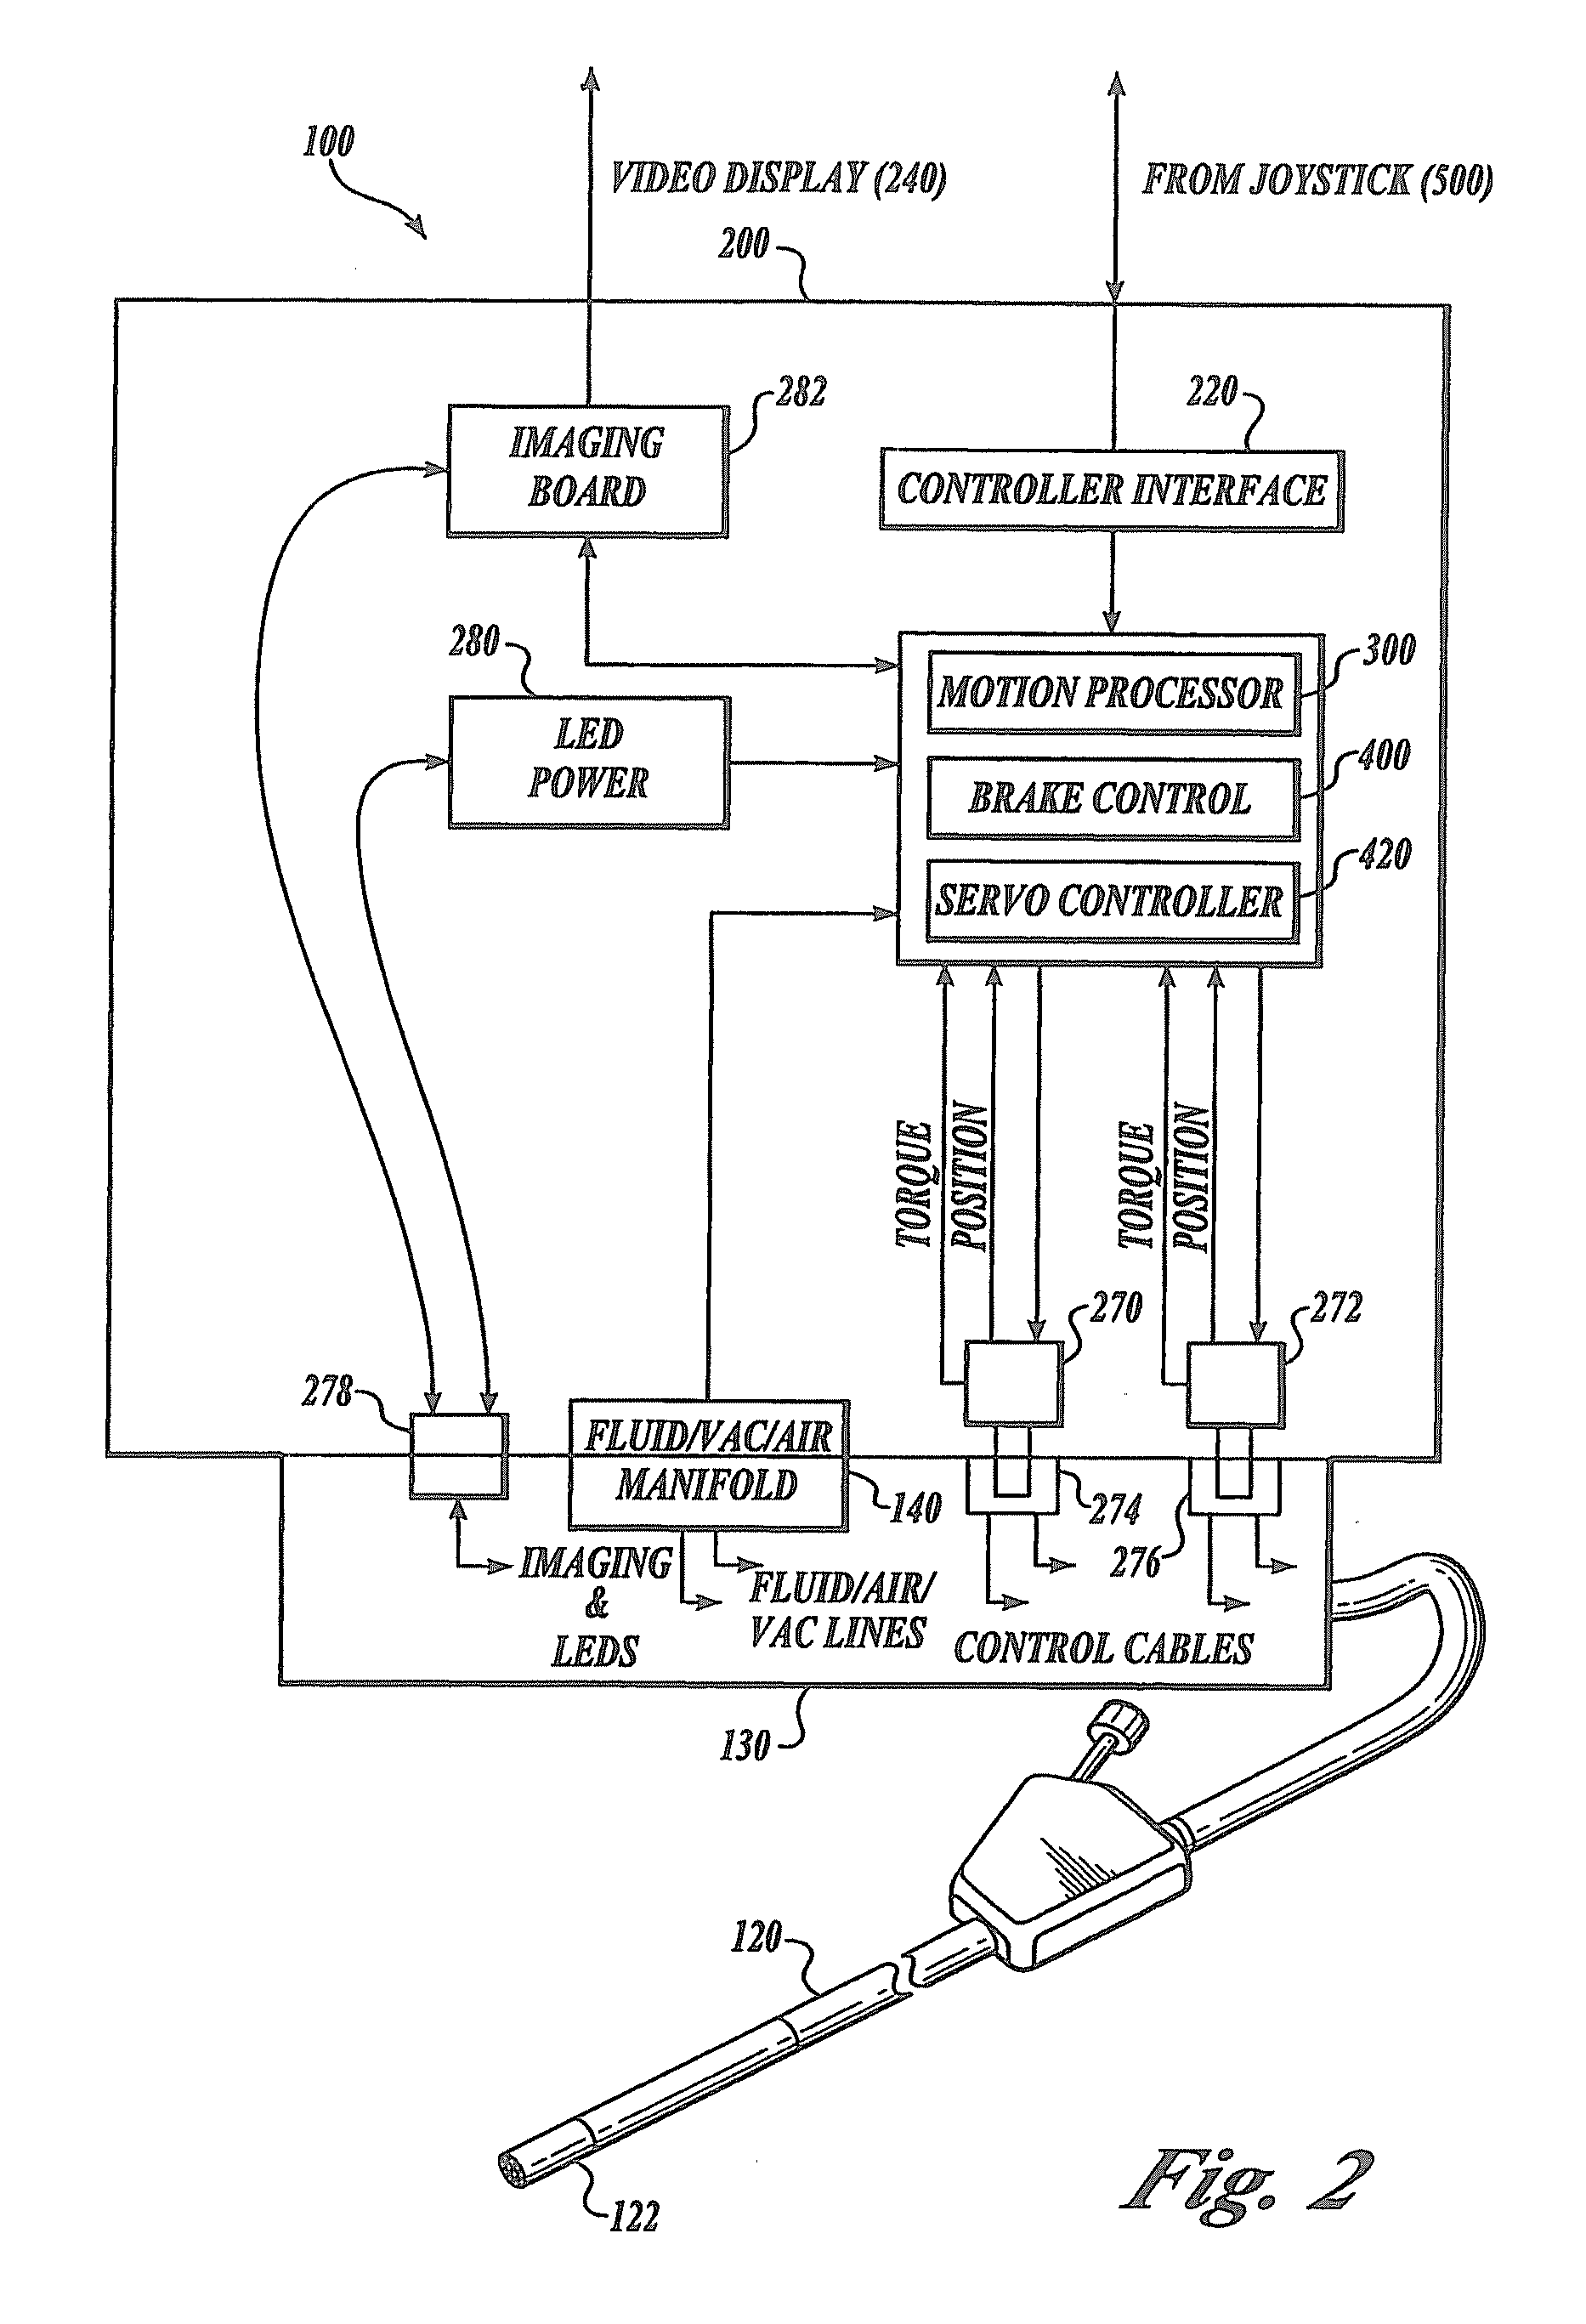 Programmable brake control system for use in a medical device